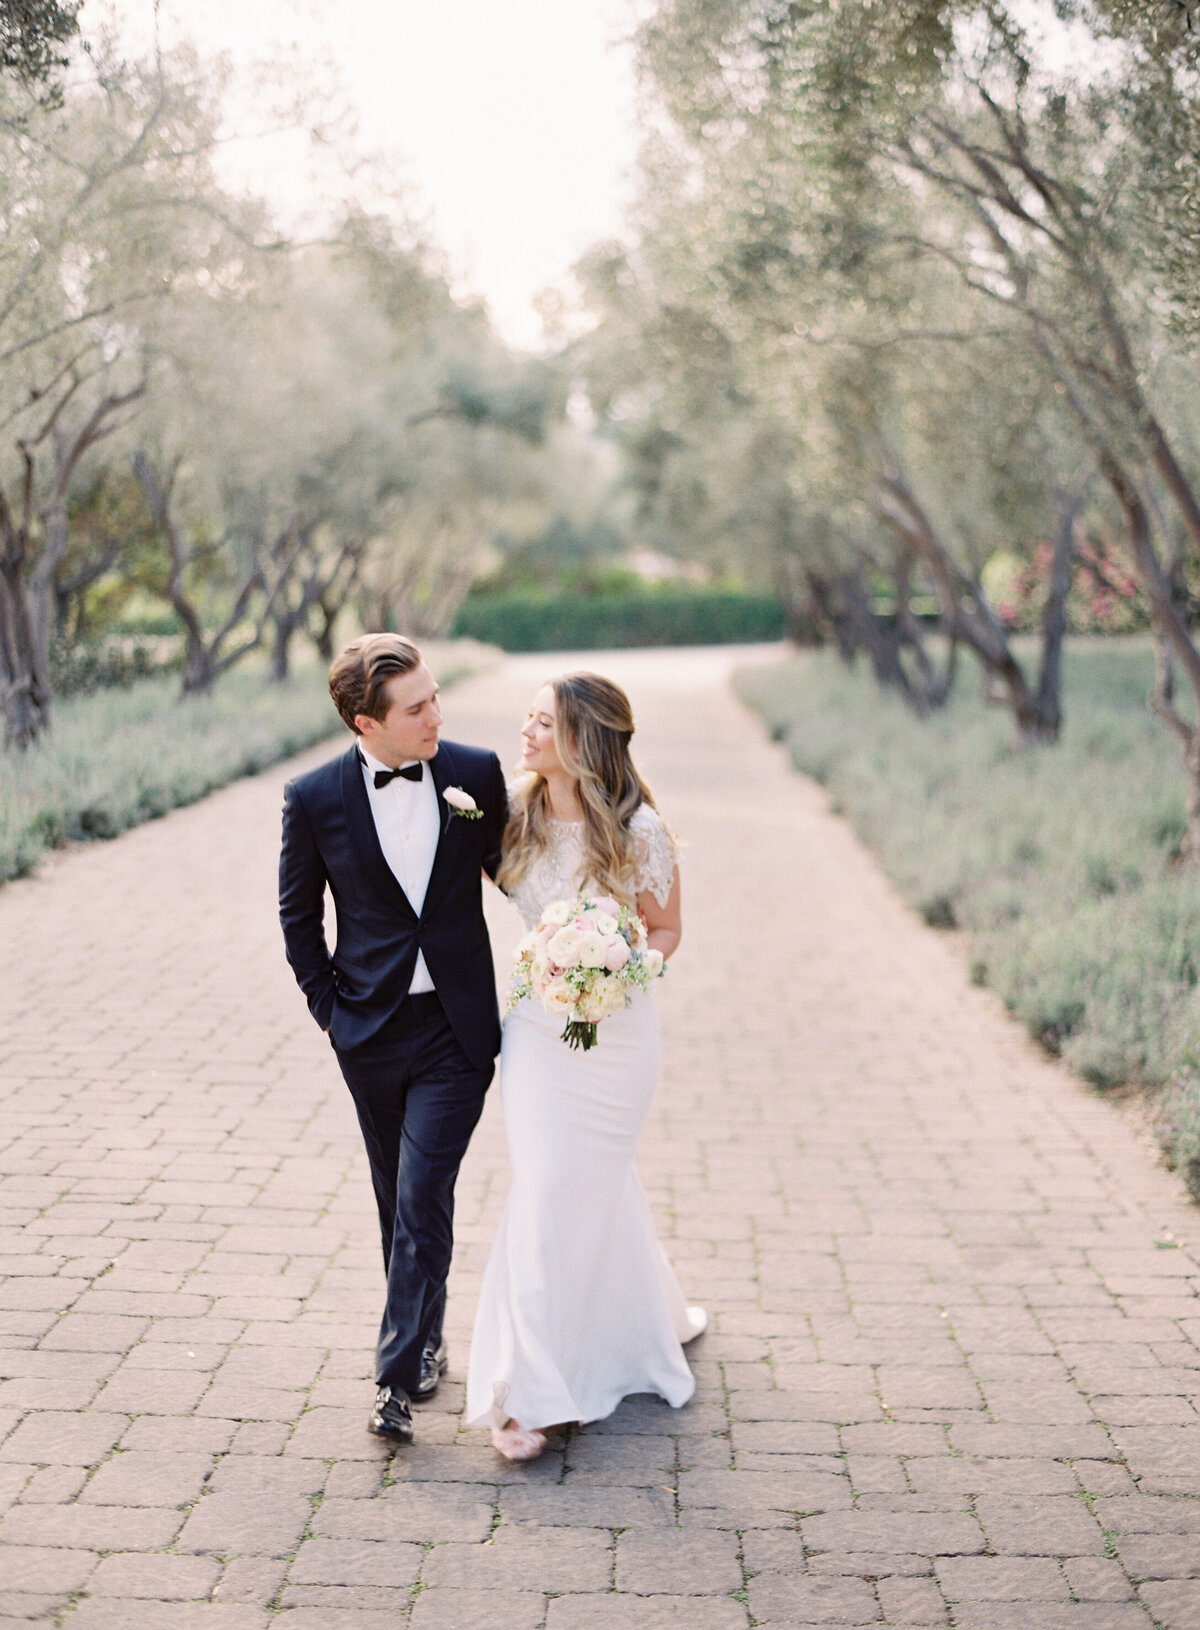 Potrait session at the iconic  San Ysidro Ranch Lavander Fields by Santa Barbara Wedding Photographers Pinnel Photography